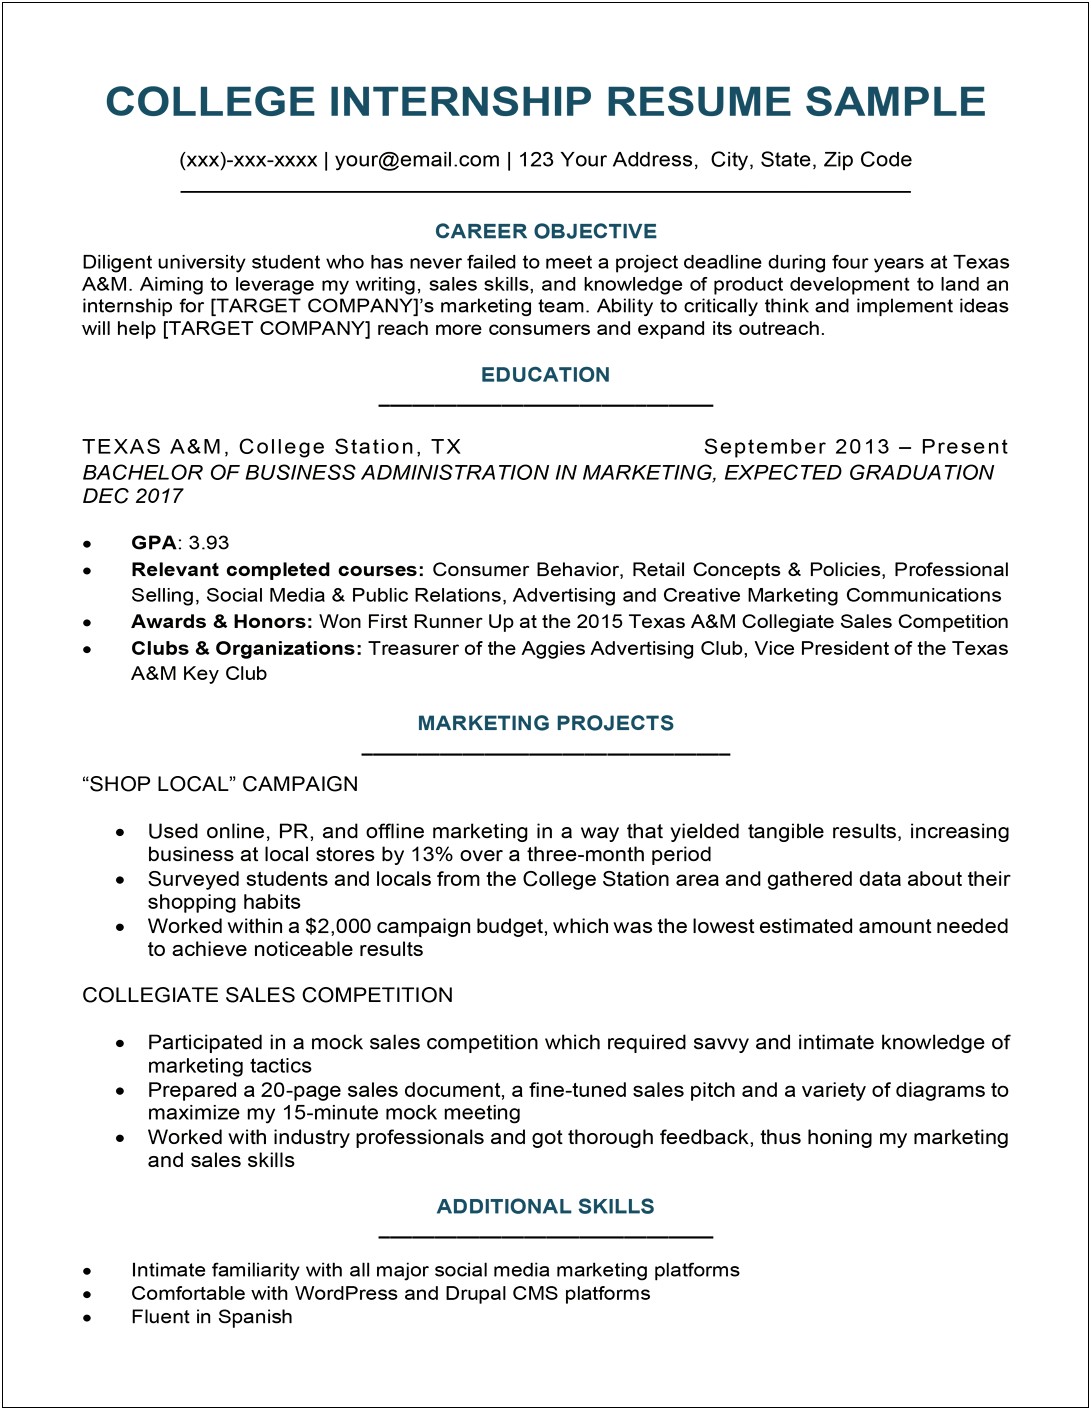 Objective Part Of Resume Examples For College Student